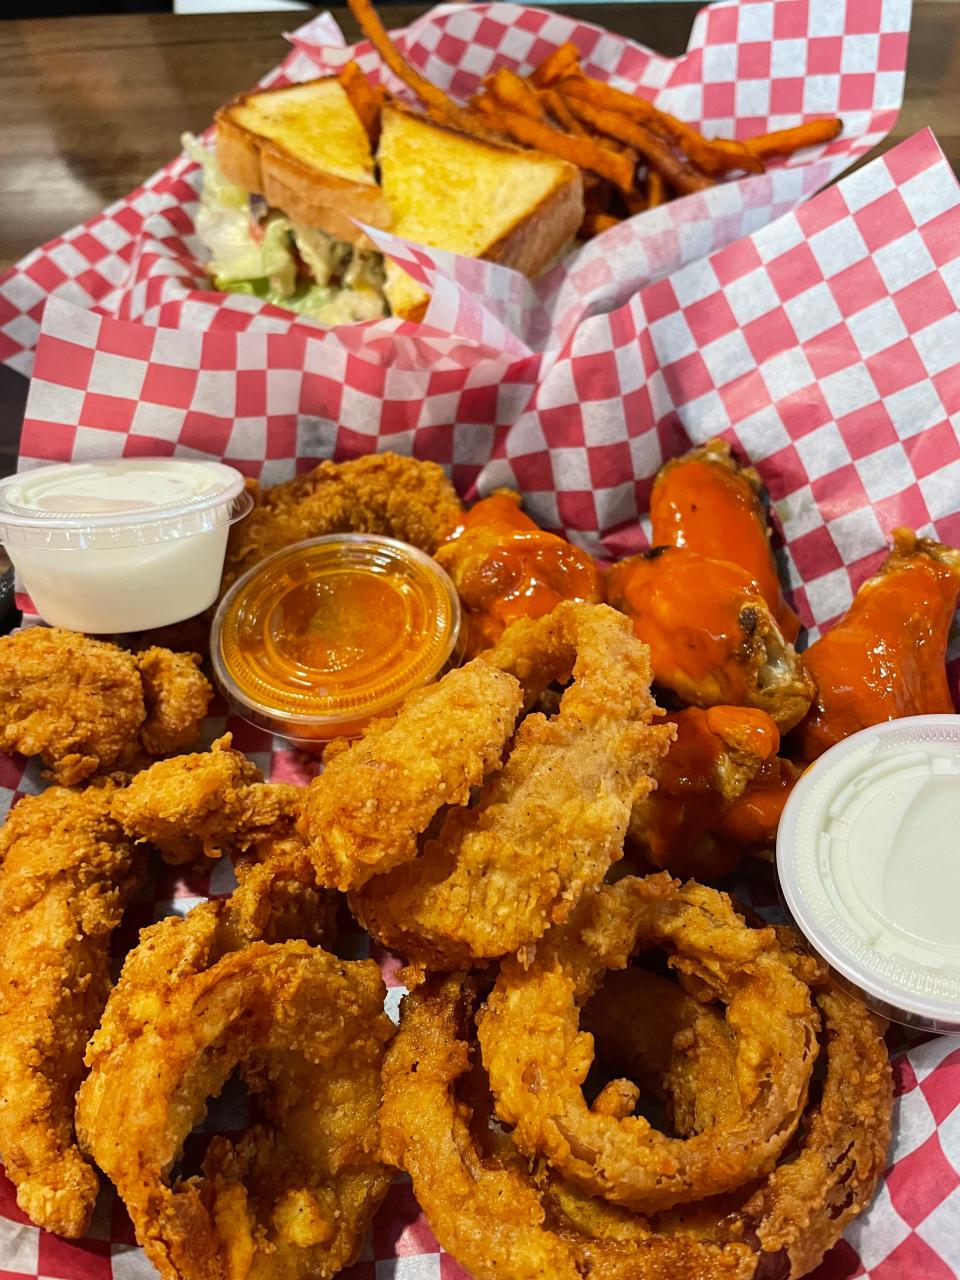 Craven Wings is a chicken-centric eatery with two Knoxville-area locations, both serving tasty takes on wings, fingers, sandwiches and more.